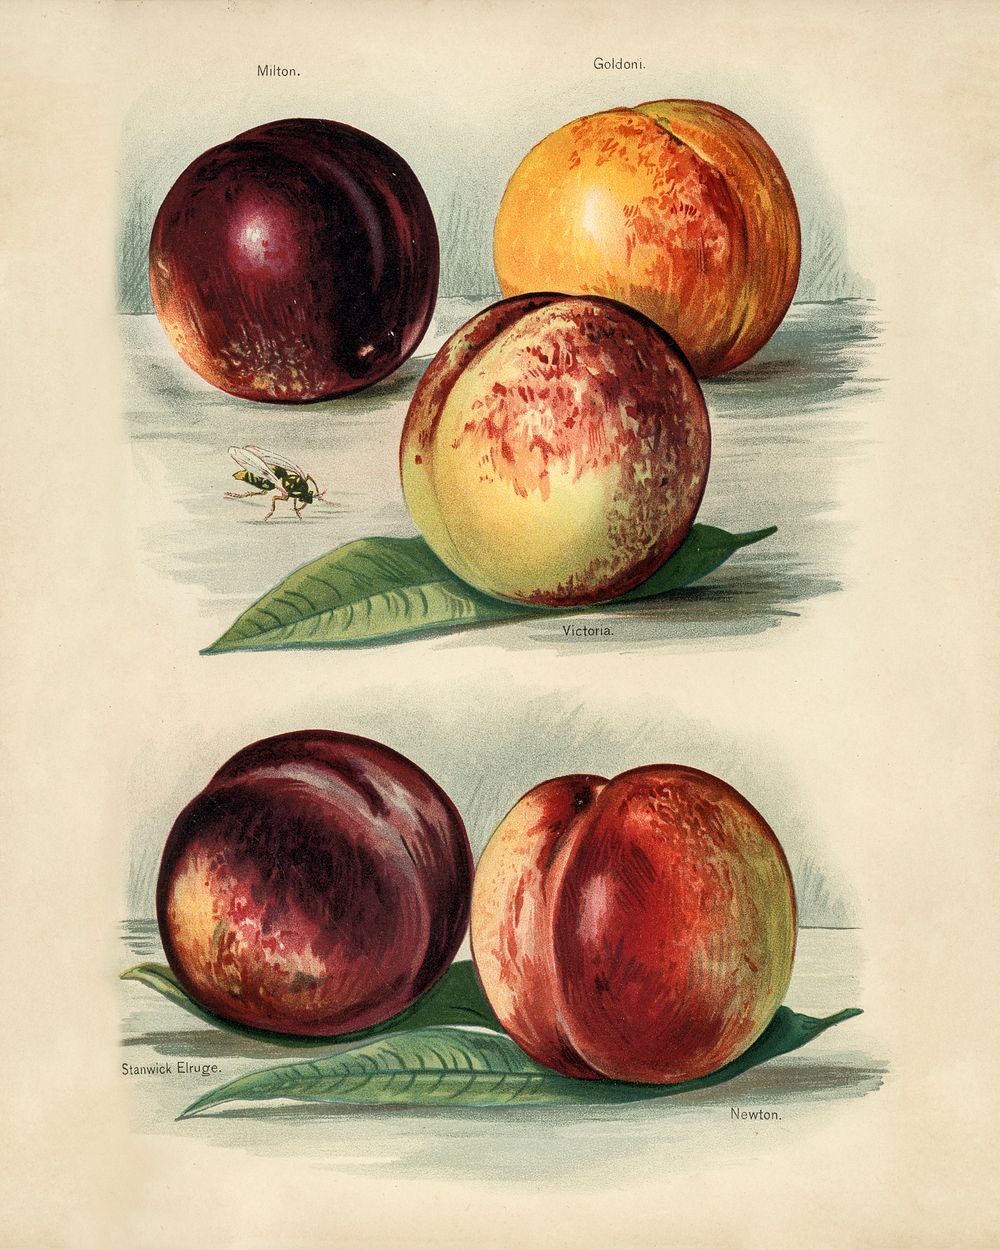 Vintage illustration of peach digitally enhanced from our own vintage edition of The Fruit Grower's Guide (1891) by John…